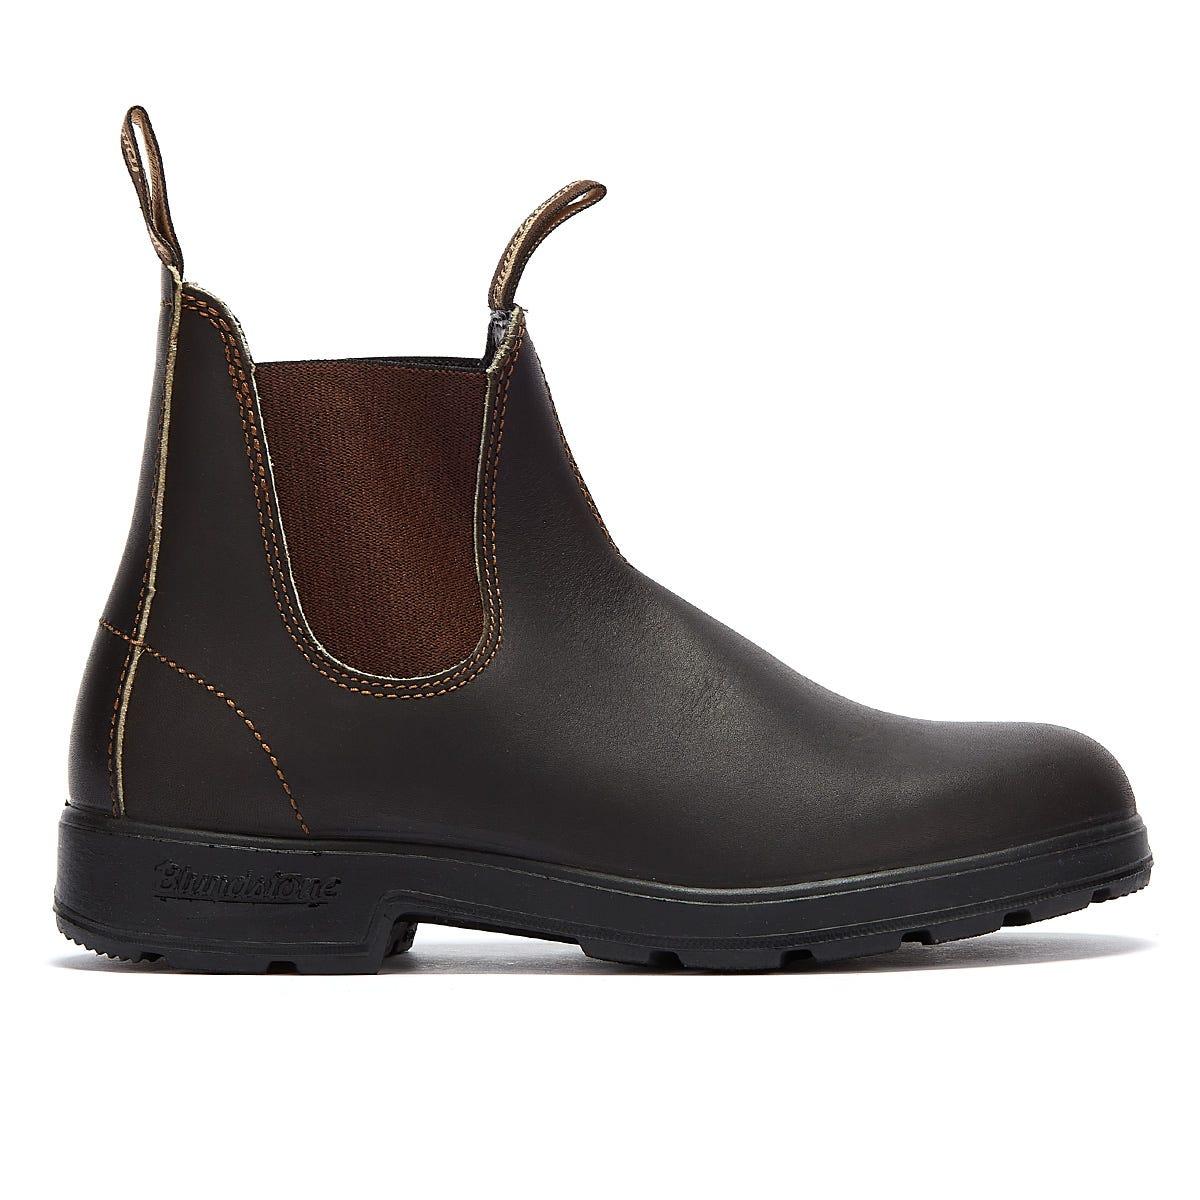 Blundstone Leather 500 Stout Brown Boots - Lyst